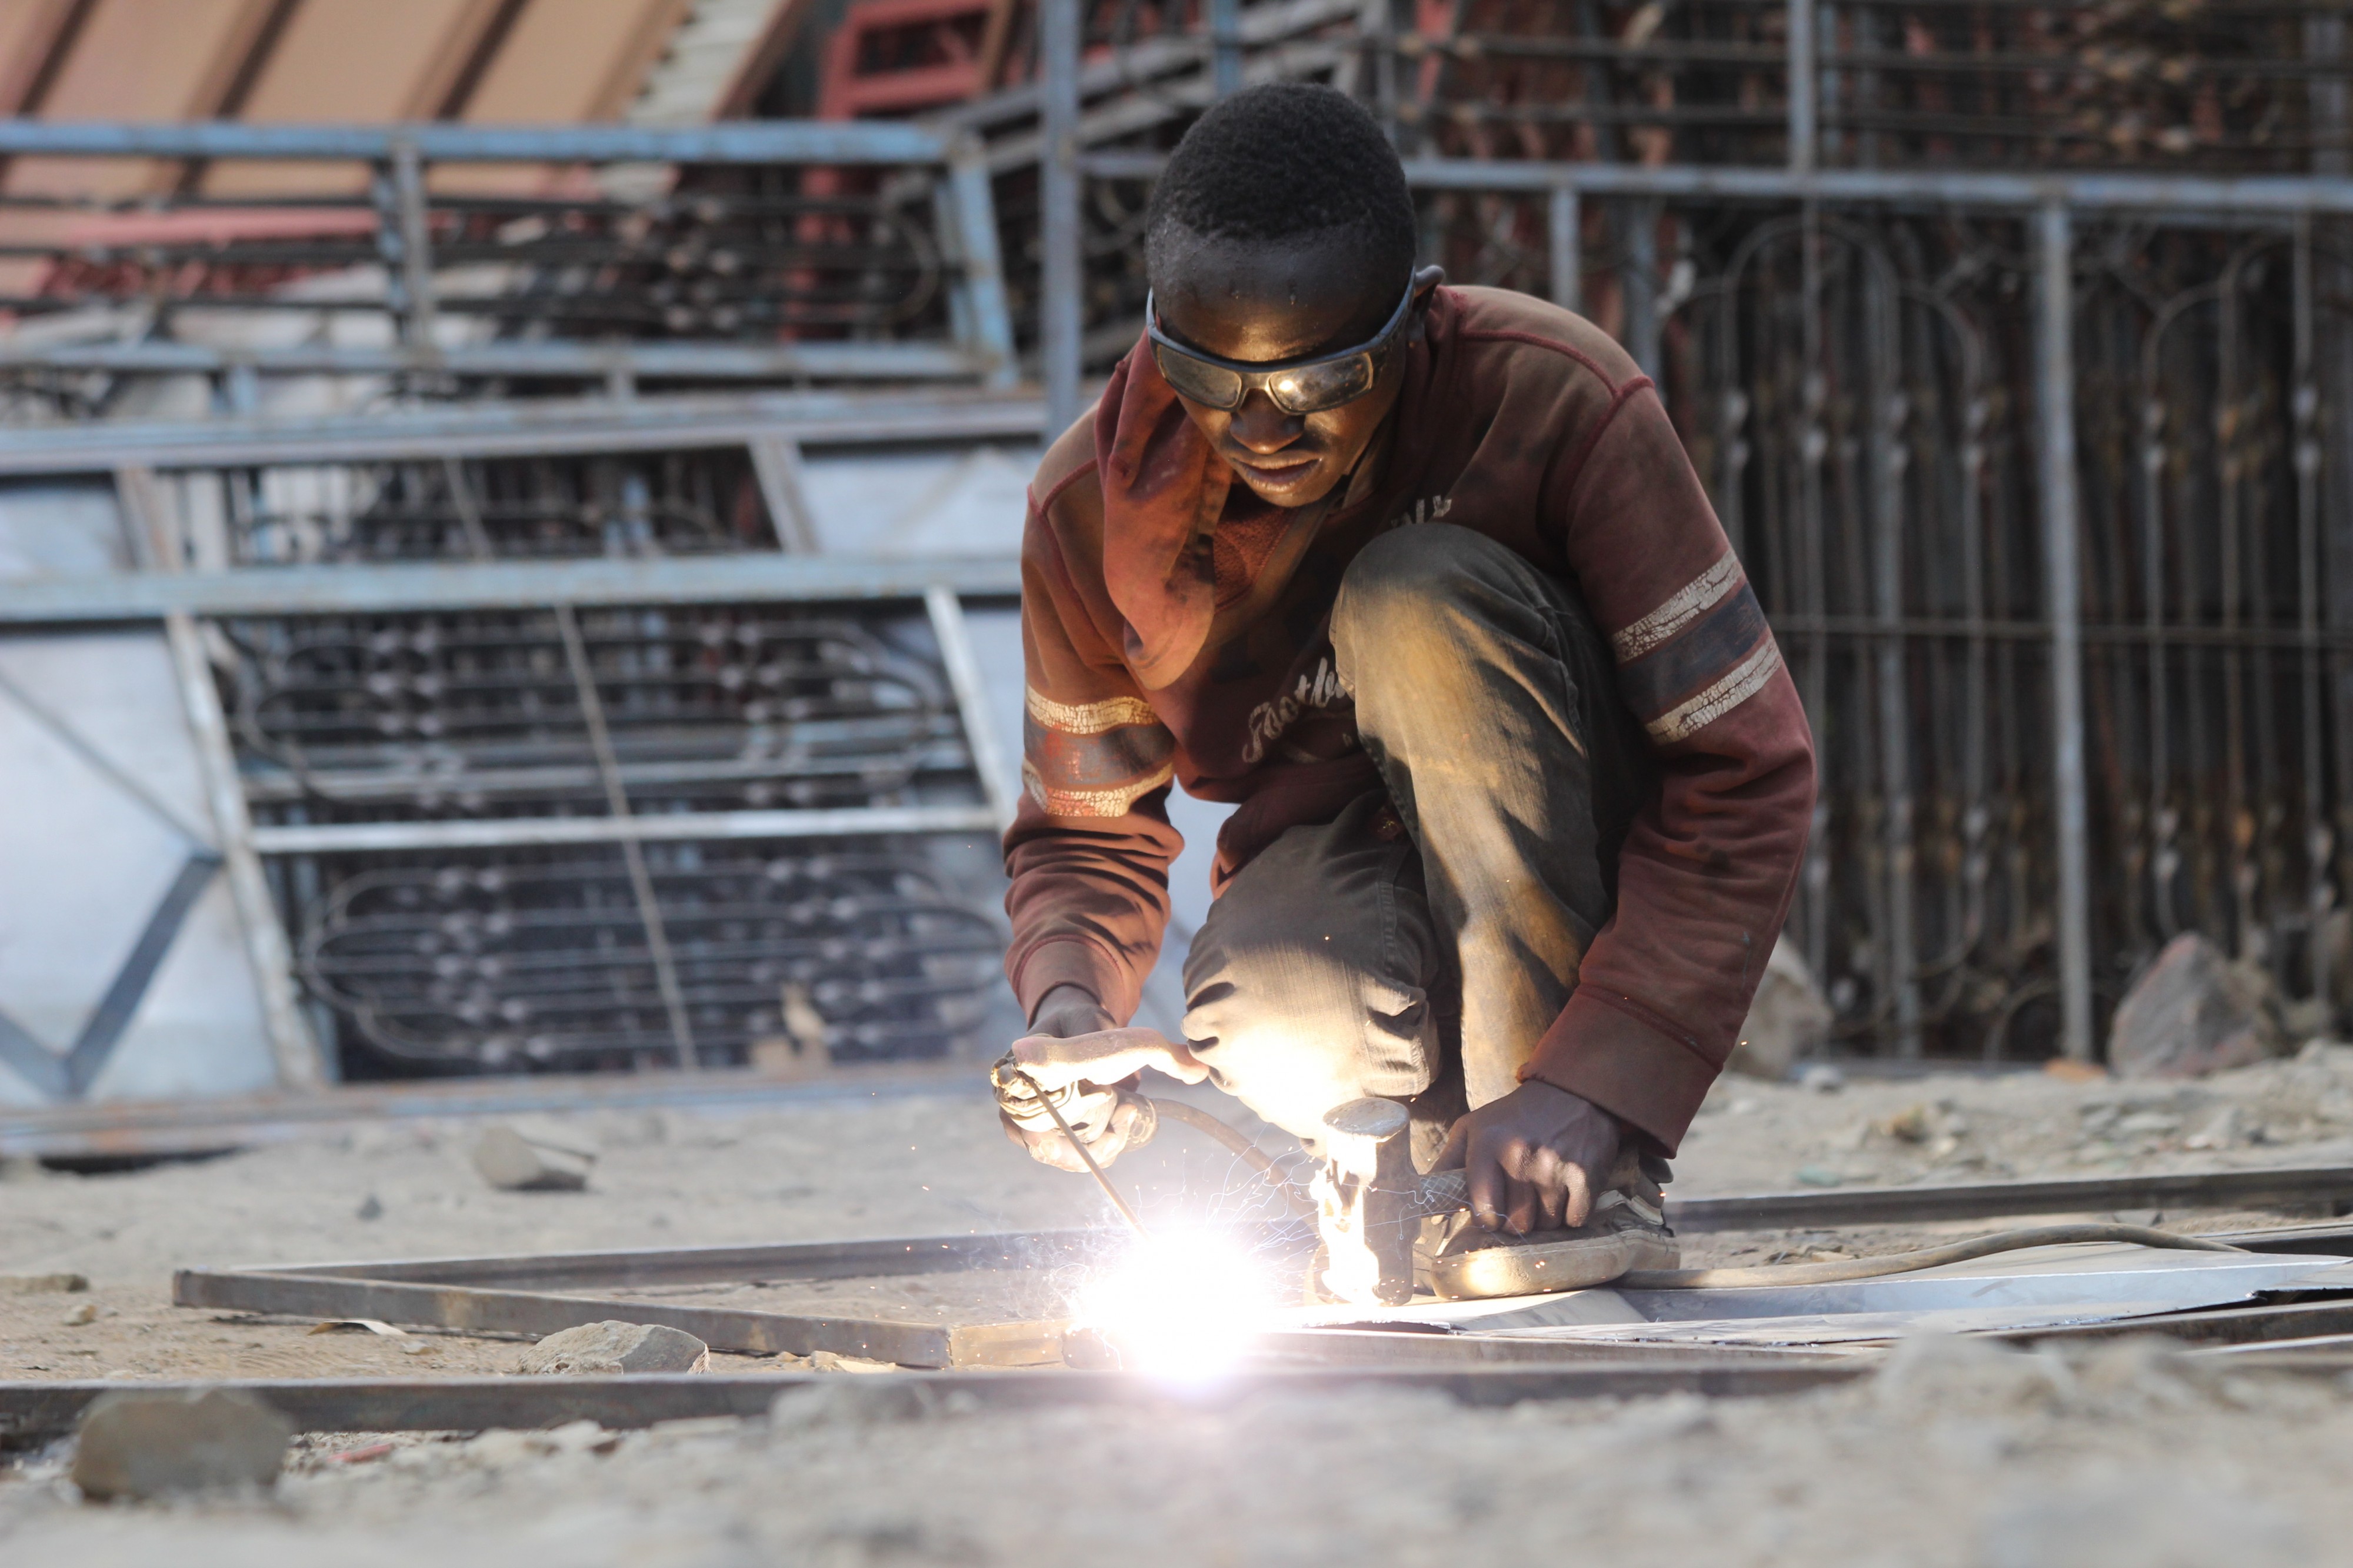 Welding activities by young man